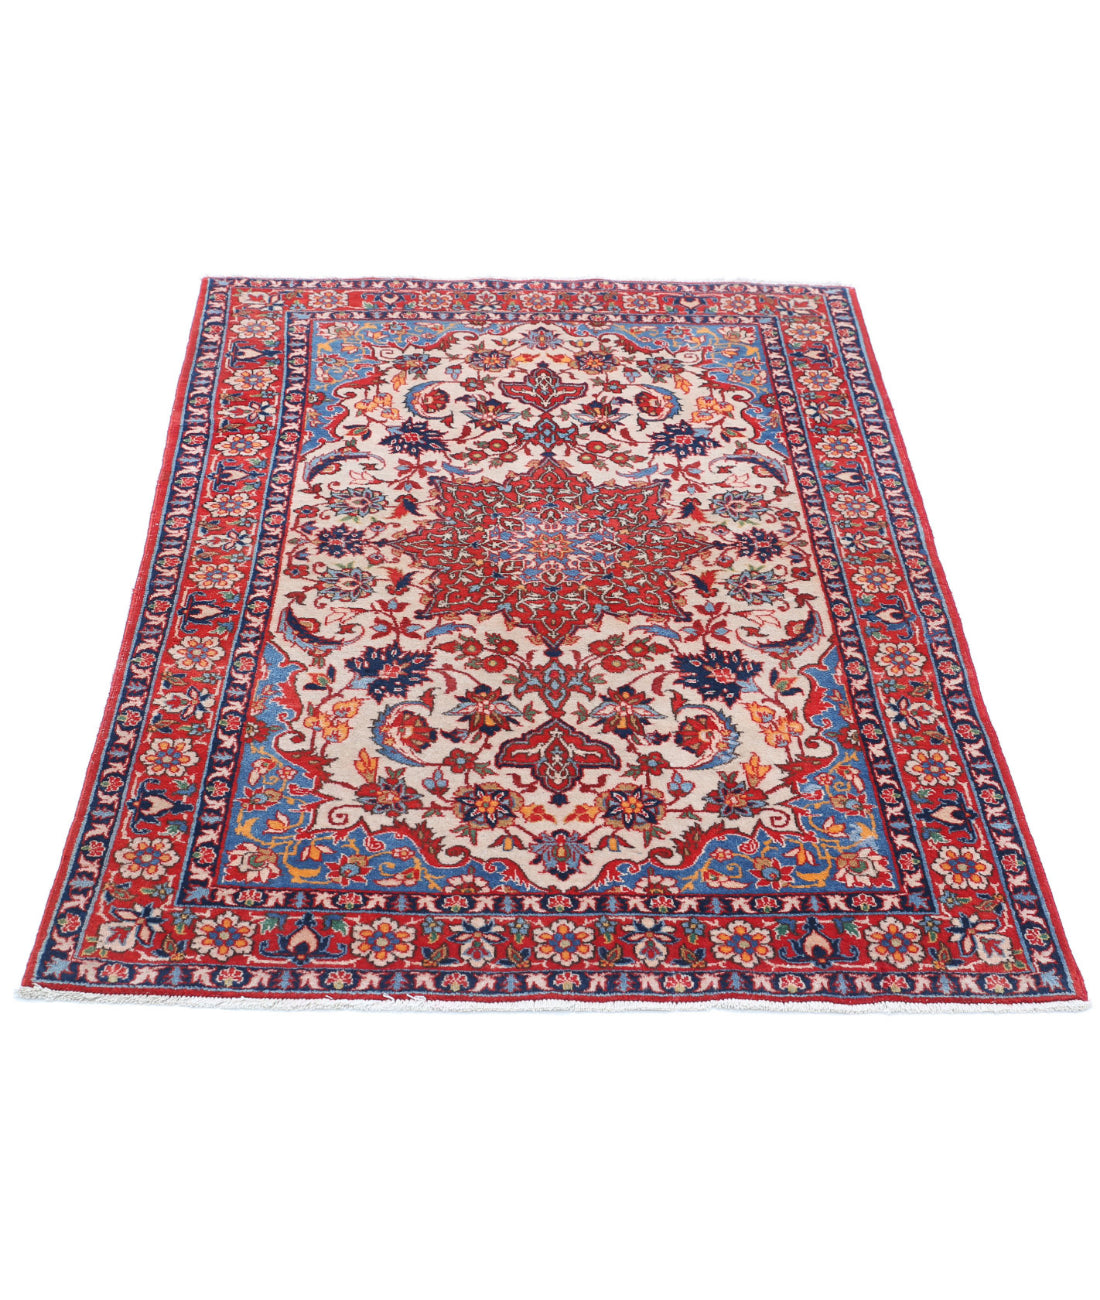 Hand Knotted Persian Isfahan Wool Rug - 3'3'' x 4'10'' 3'3'' x 4'10'' (98 X 145) / Ivory / Red